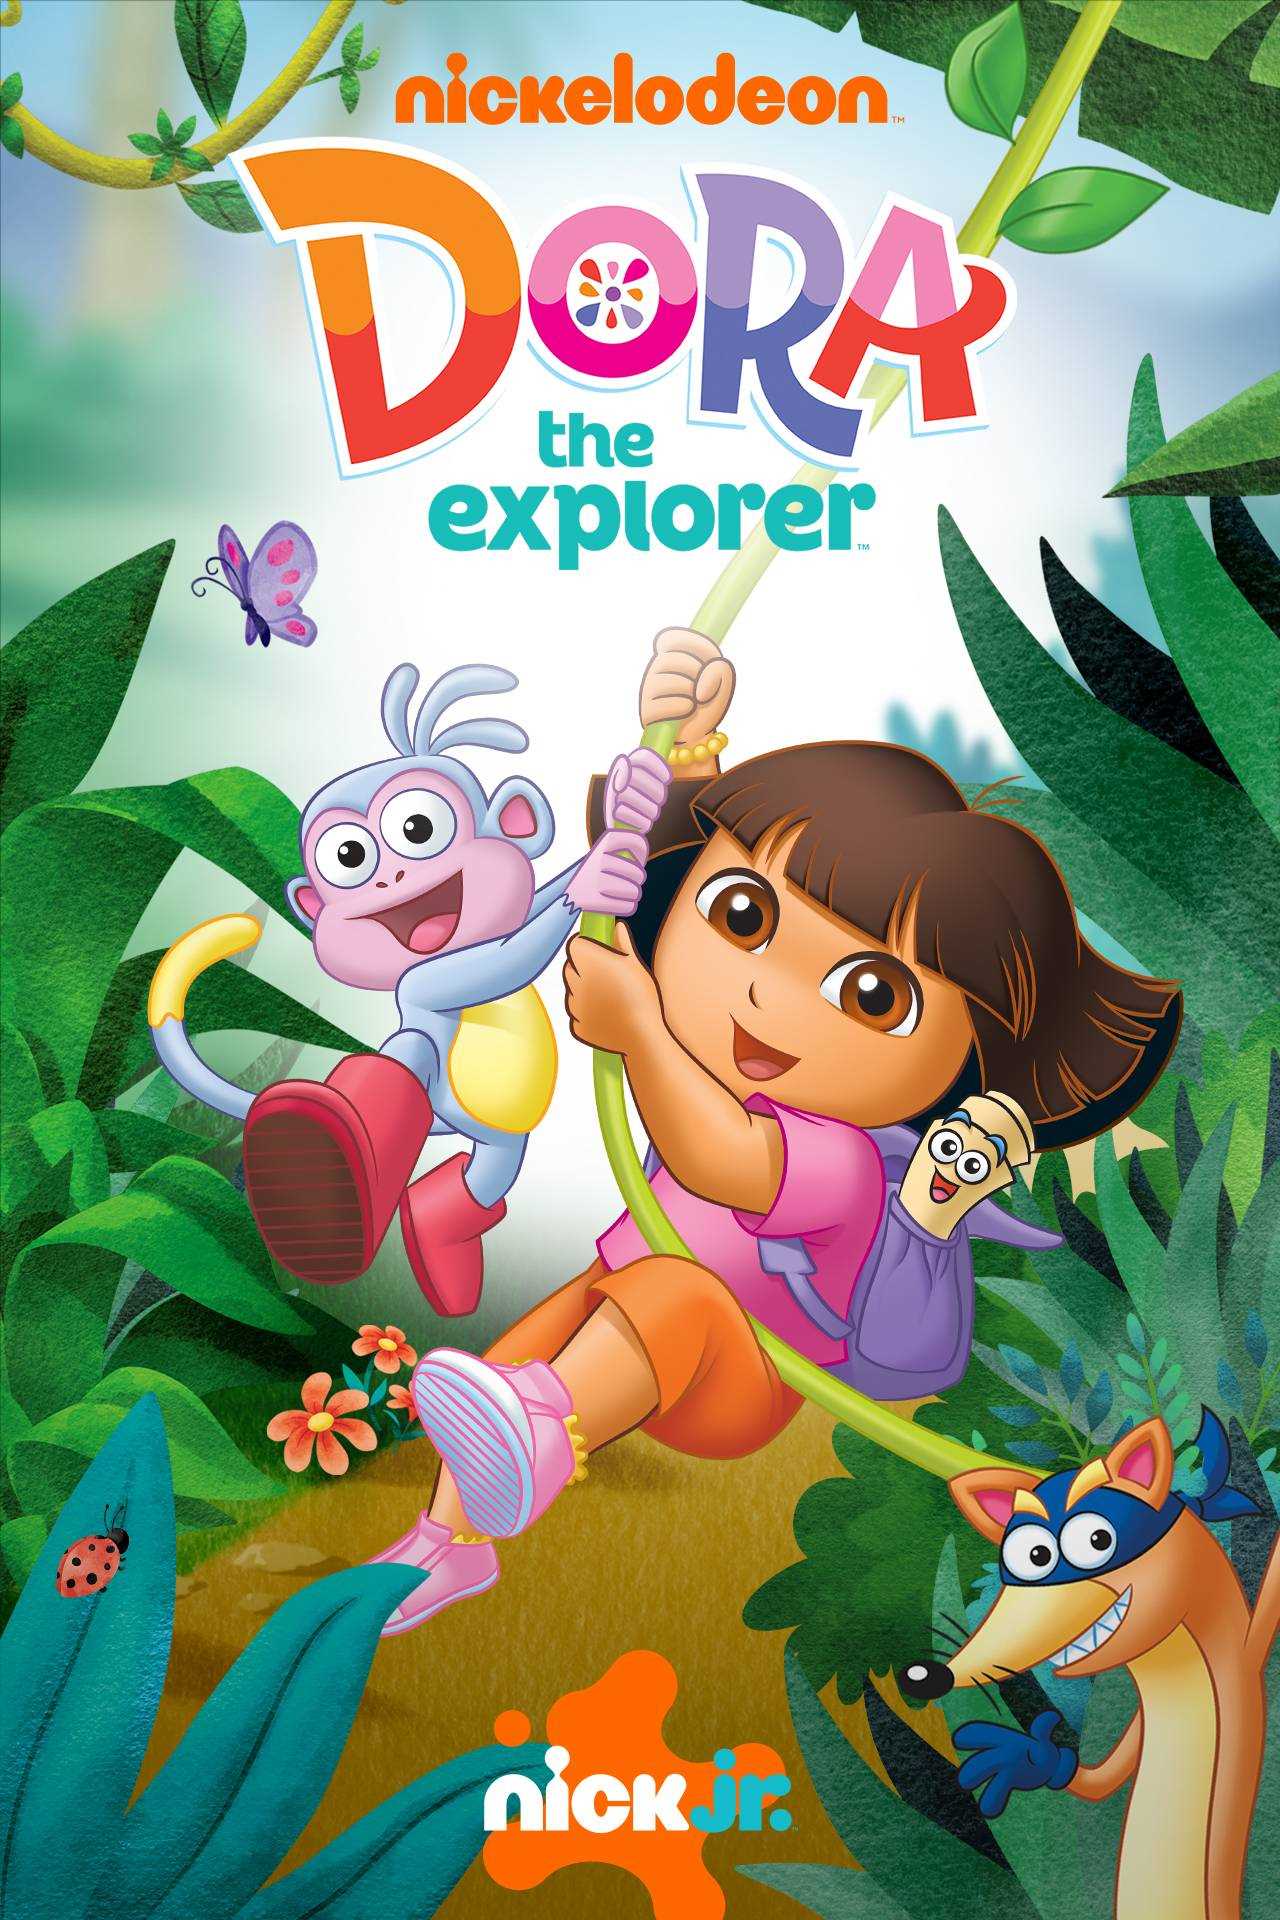 The Speculations Surrounding Dora's Height